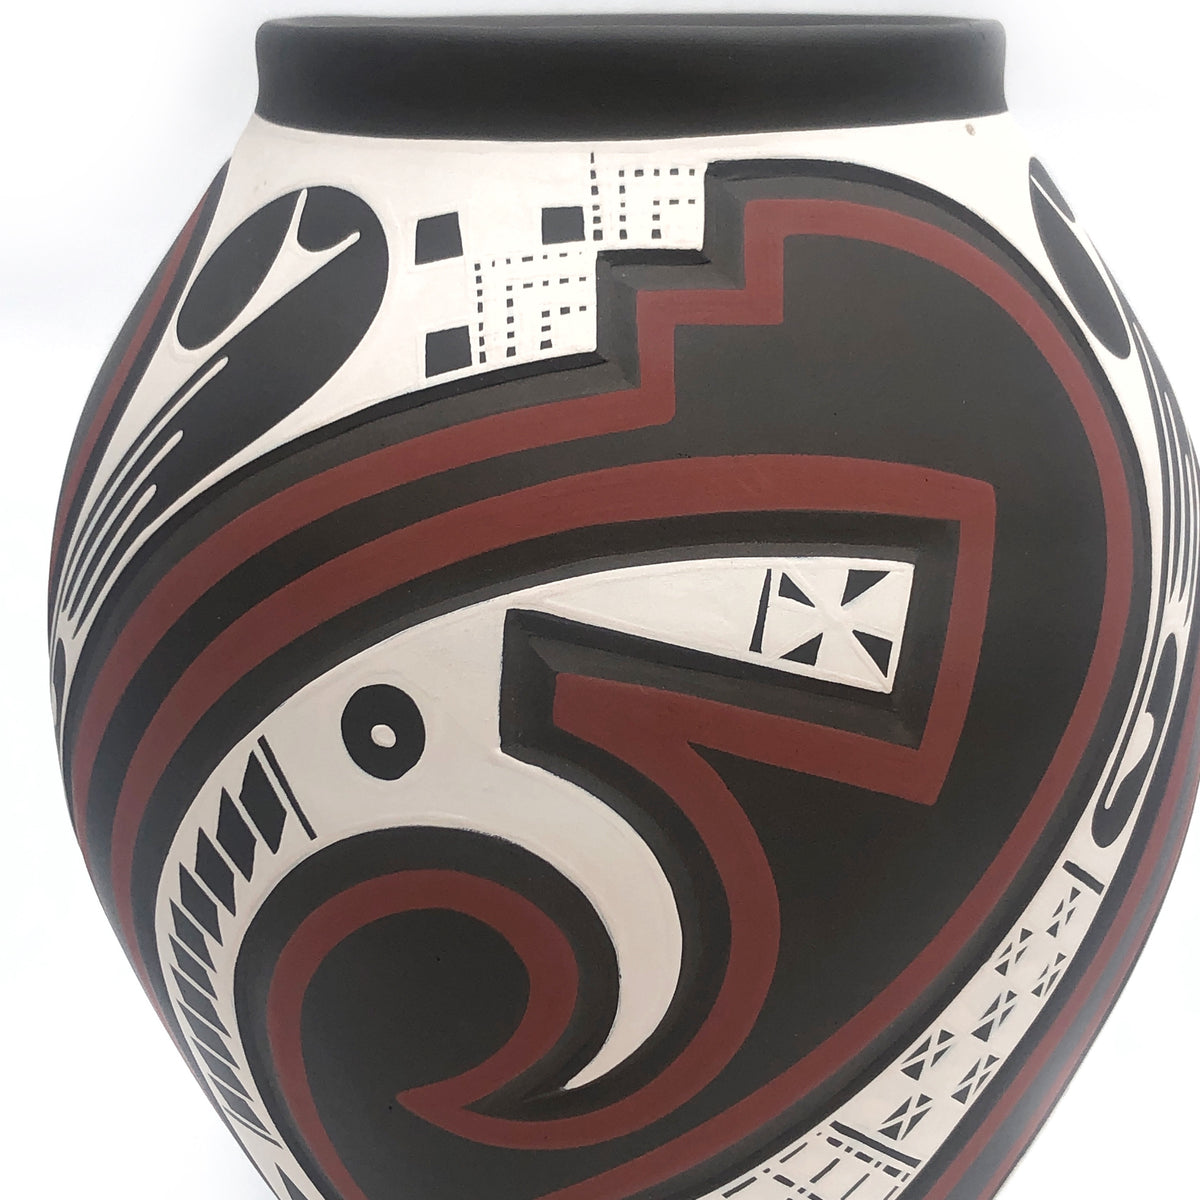 Engraved and Painted Pot by Lazaro Osuna Silveira